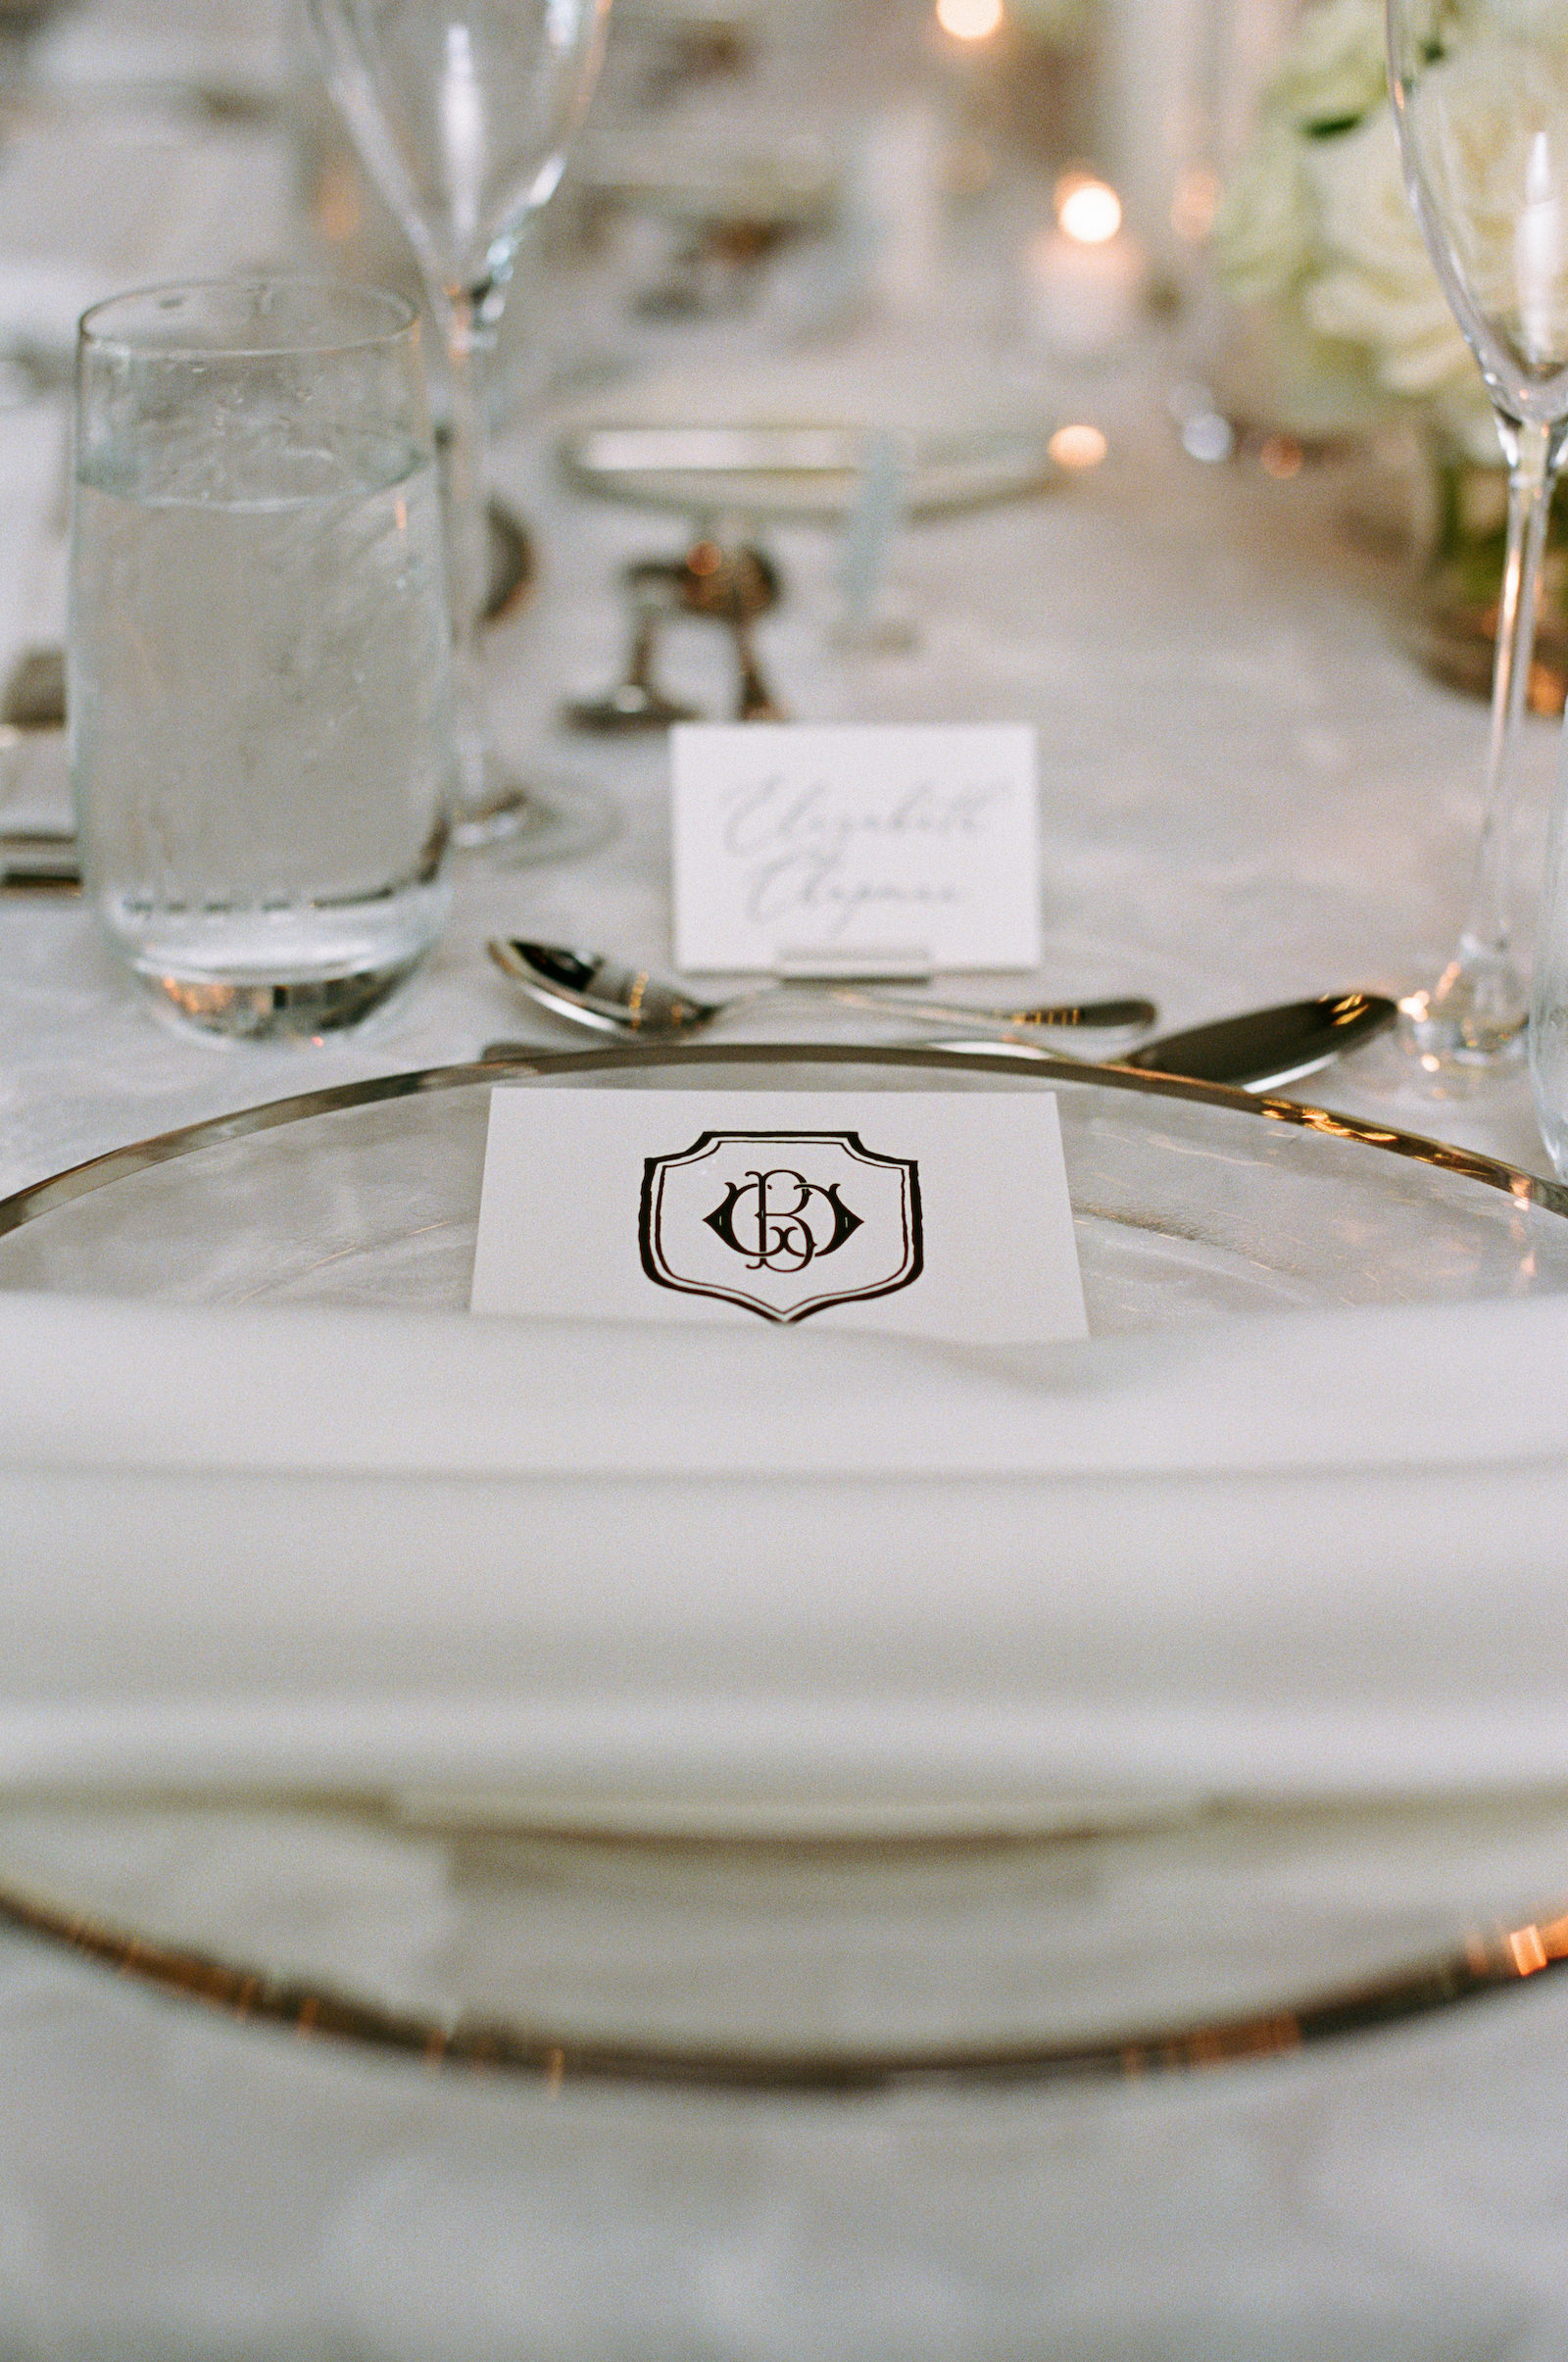 Luxurious Formal All White Wedding Reception Decor, Gold Rimmed Clear Glass Charger with Custom Stationery | Tampa Bay Wedding Planner Parties A'la Carte | Wedding Rentals Gabro Event Services